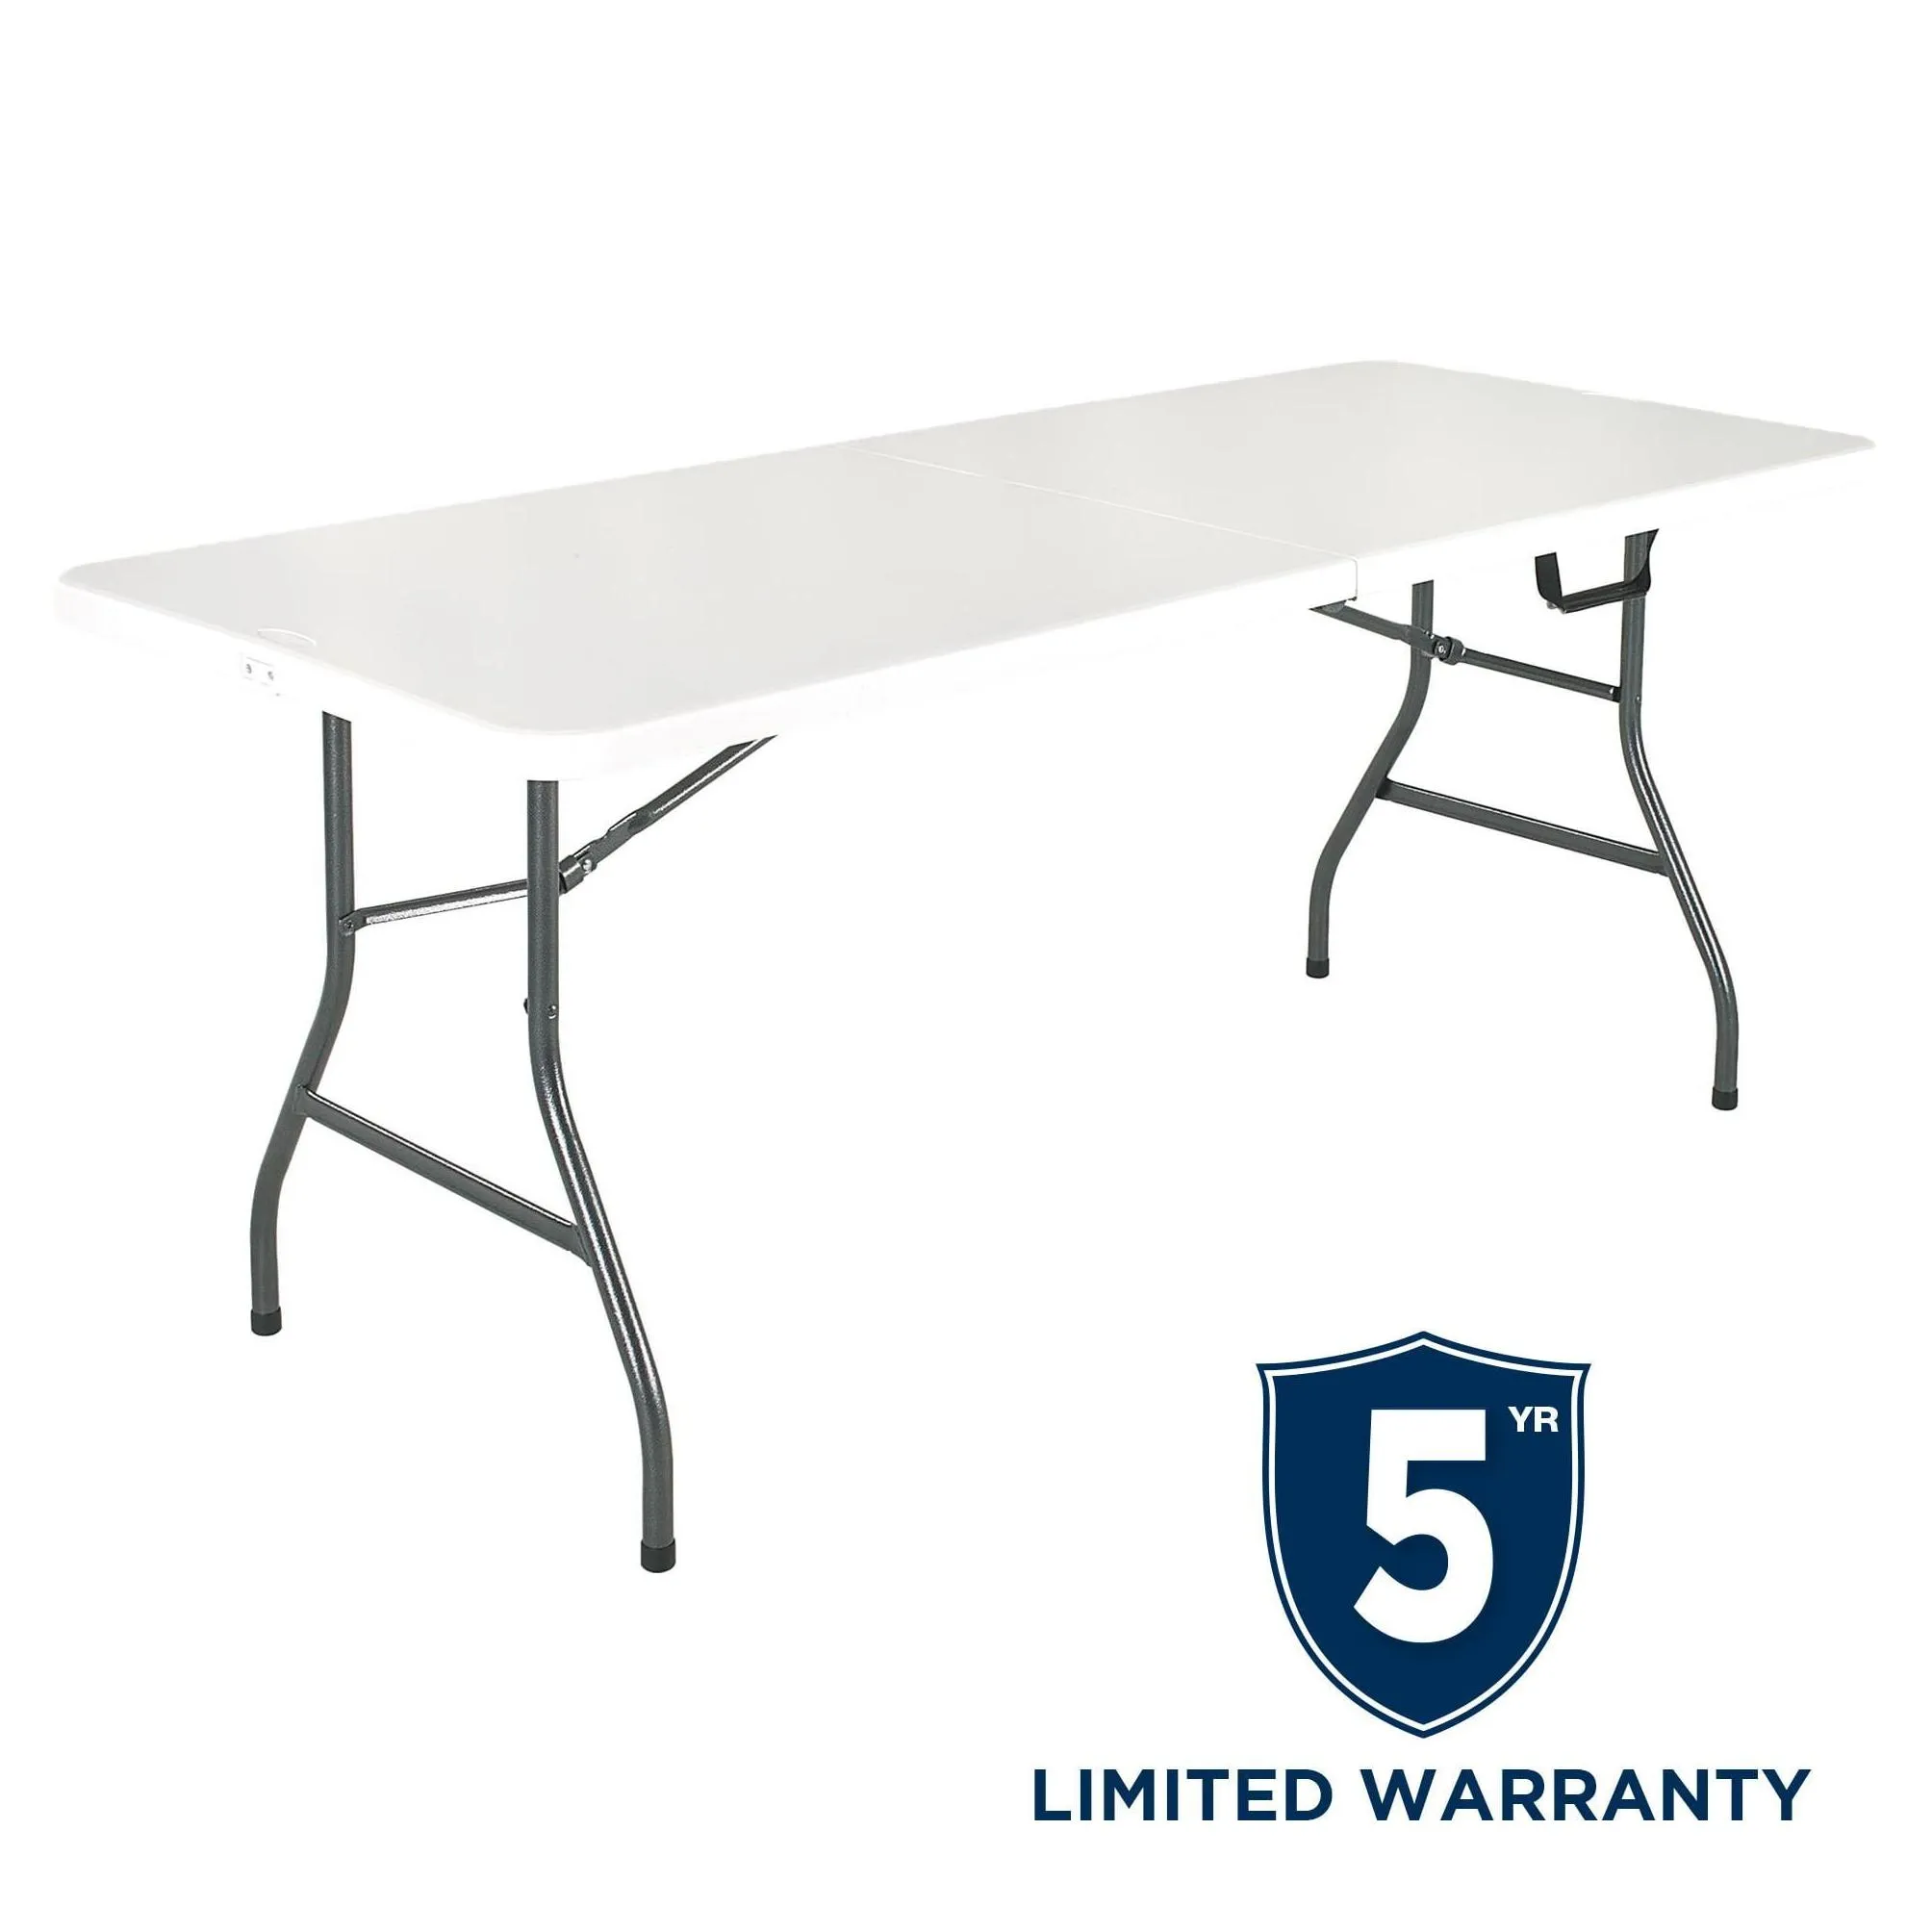 Camp Furniture 6 Foot Folding Table In White Le Drop Delivery Sports Outdoors Camping Hiking Hiking And Camping Dhxu0